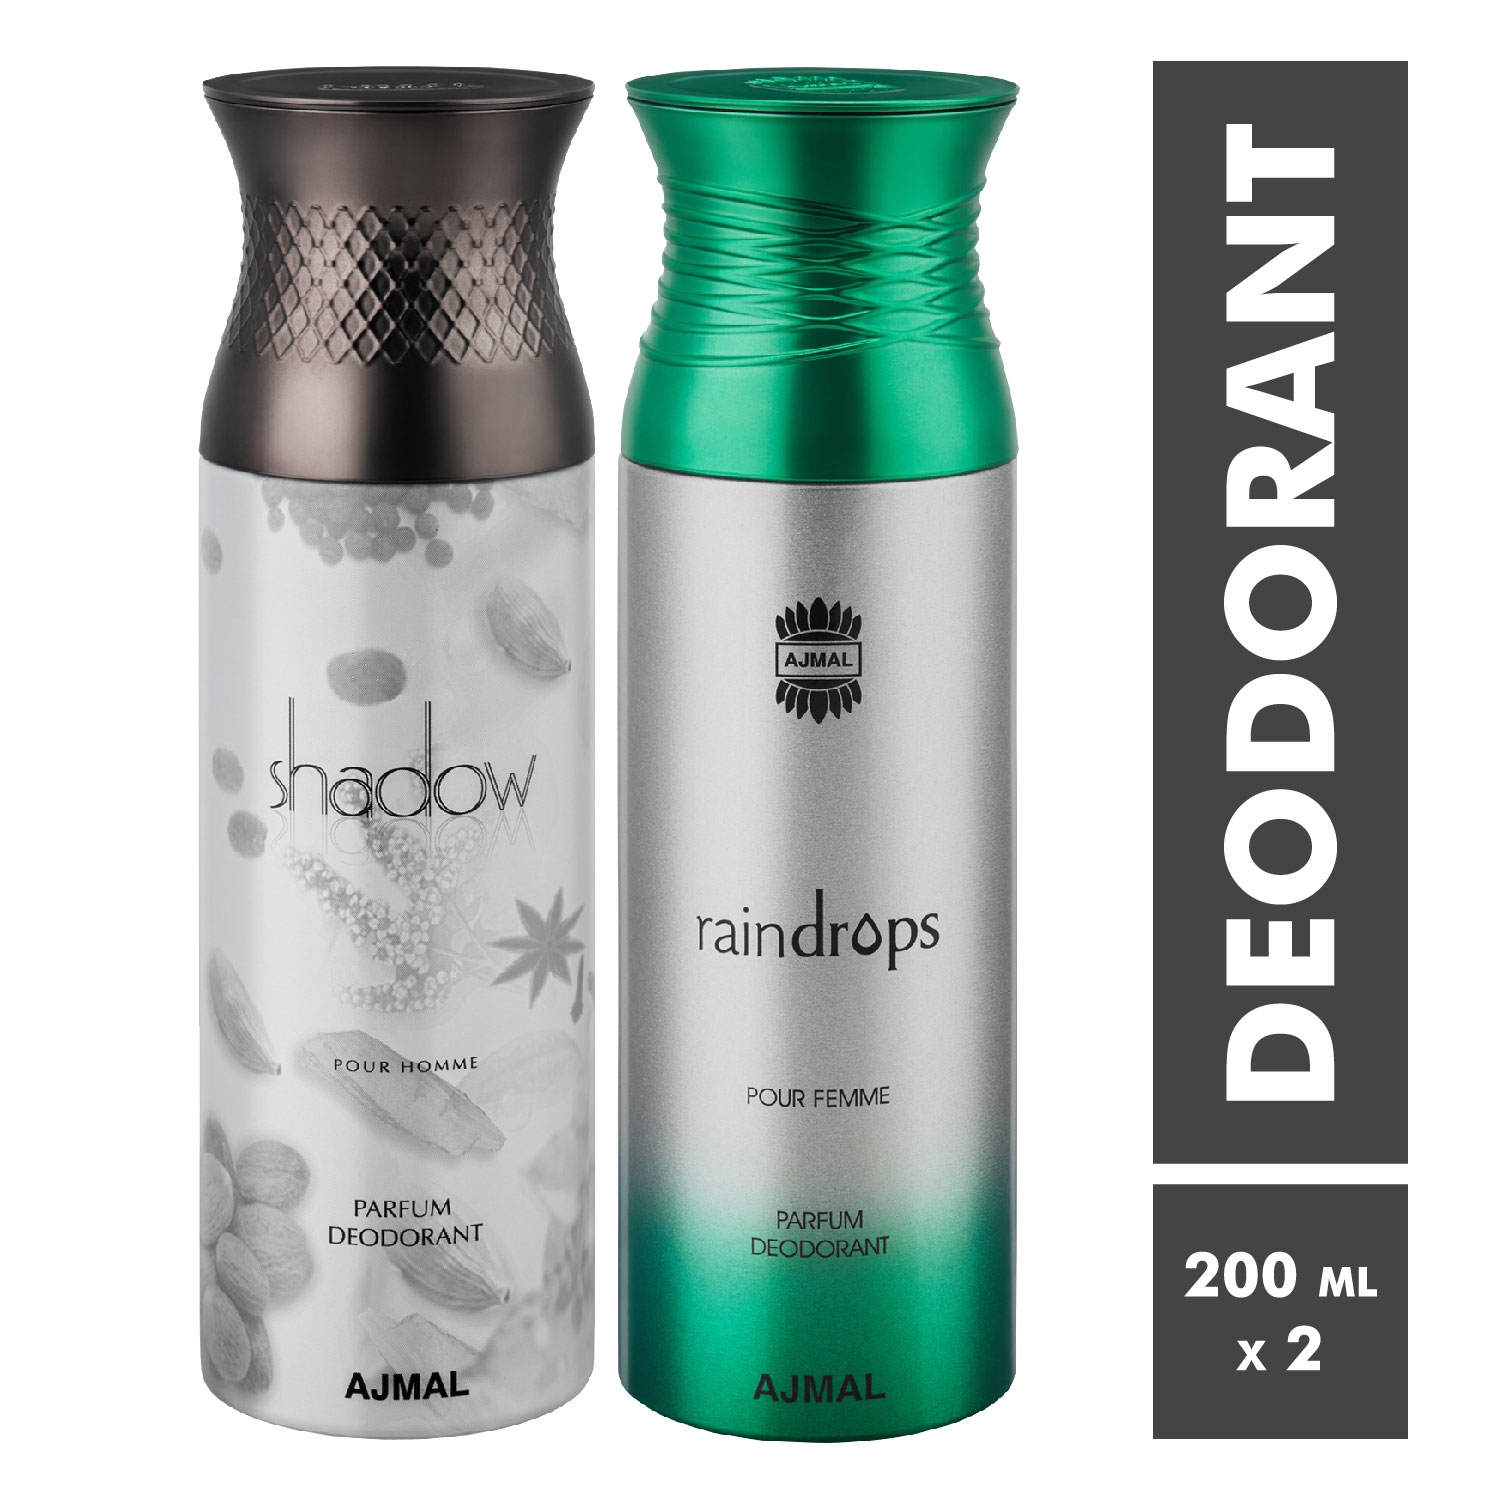 Ajmal | Shadow Homme and Raindrops Deodorant Spray - Pack of 2